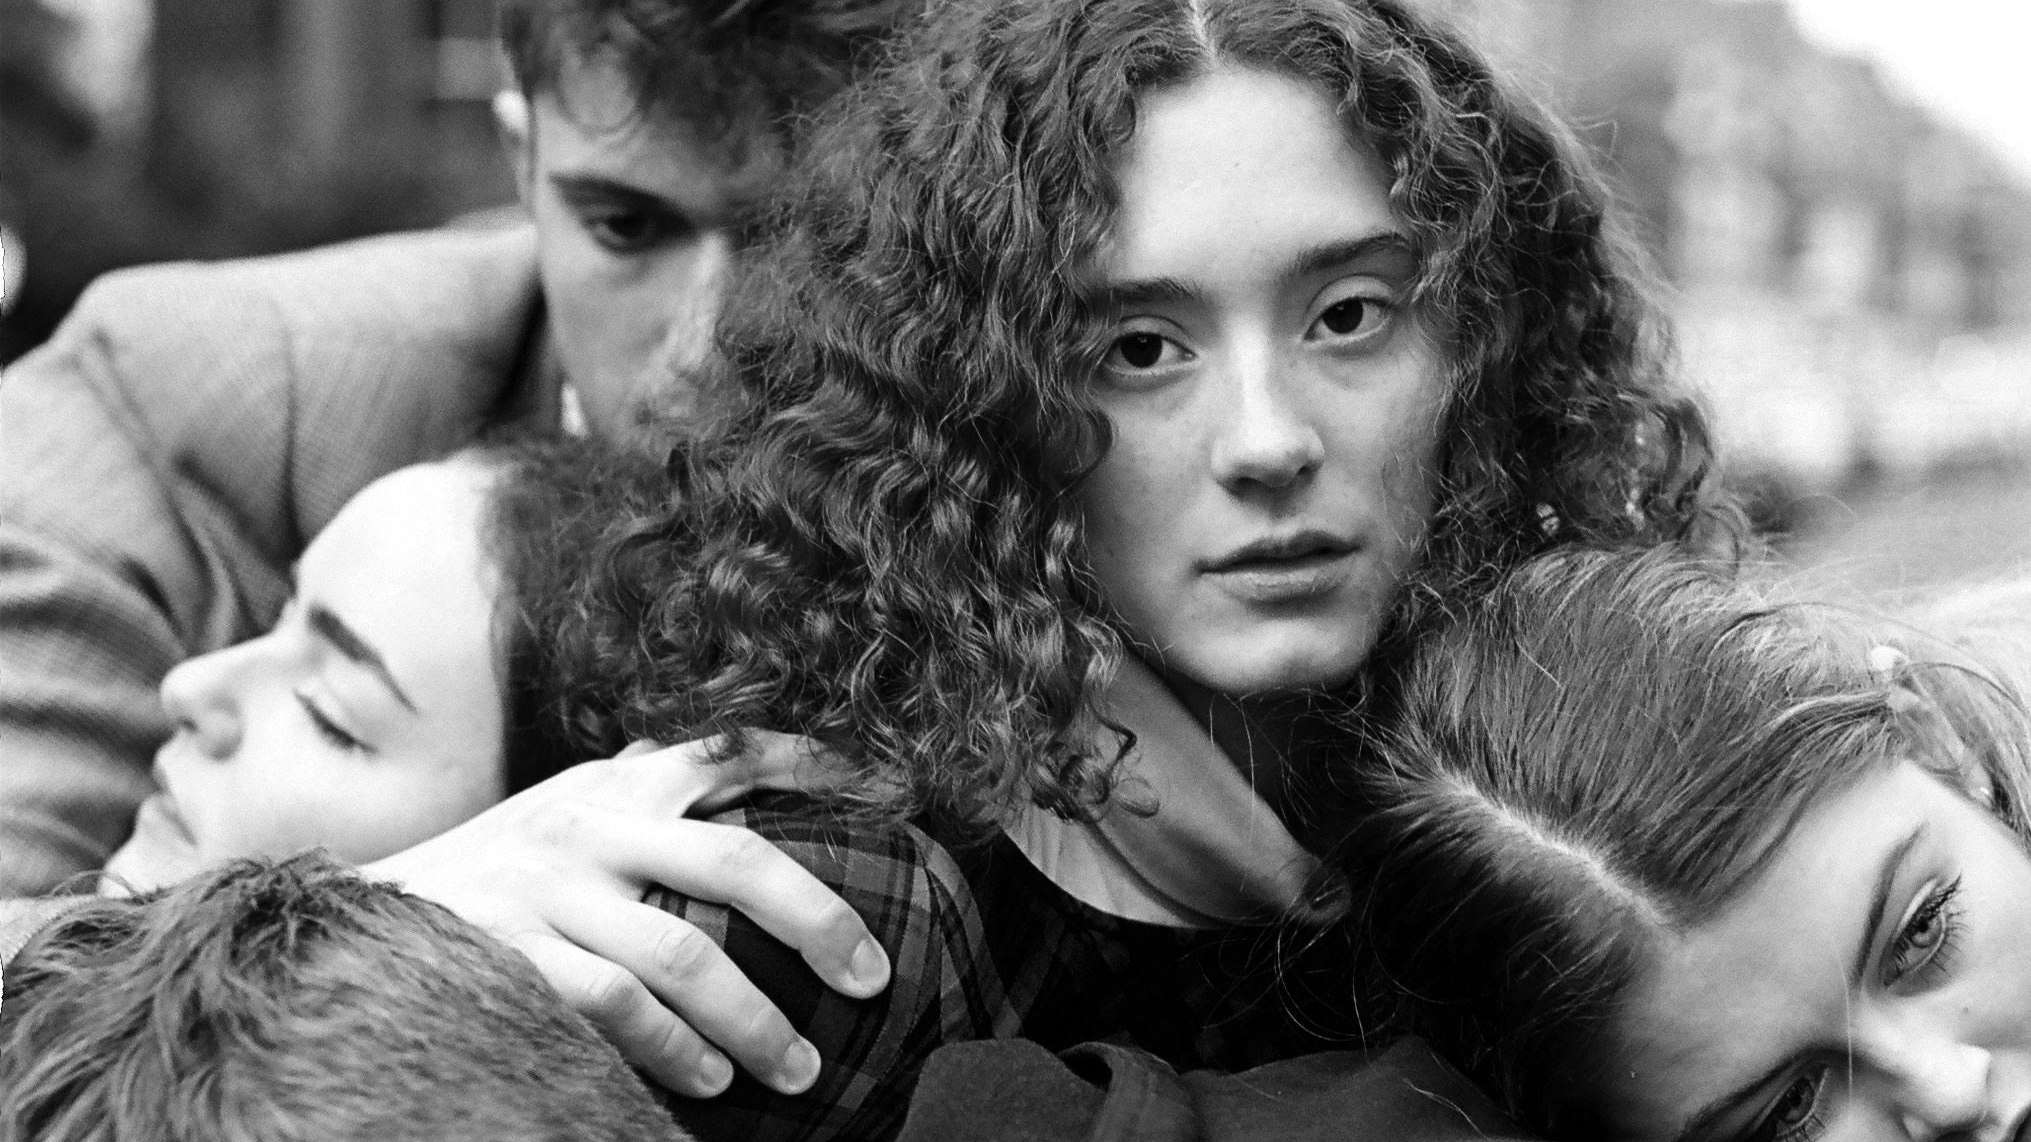 A cluster of people wrapped around one another in a greyscale photo. The central woman looks directly at the camera.